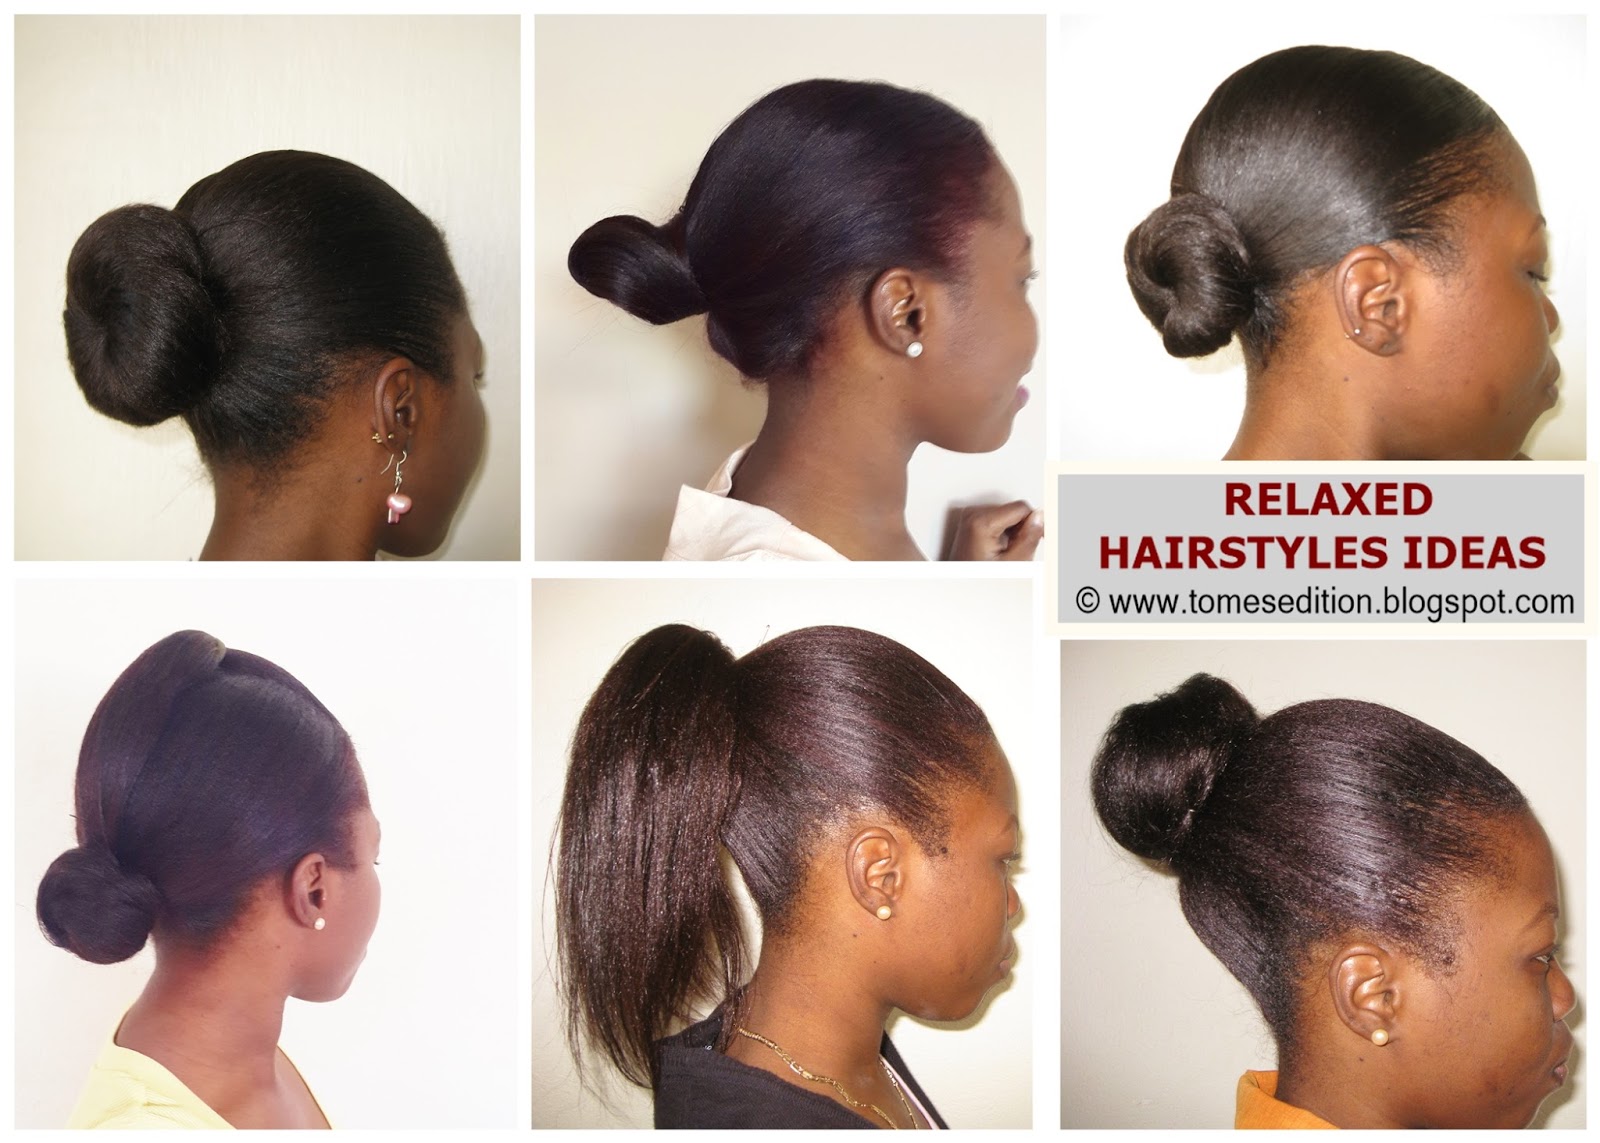 Tomes Edition Favorite Ways To Style My Relaxed Hair